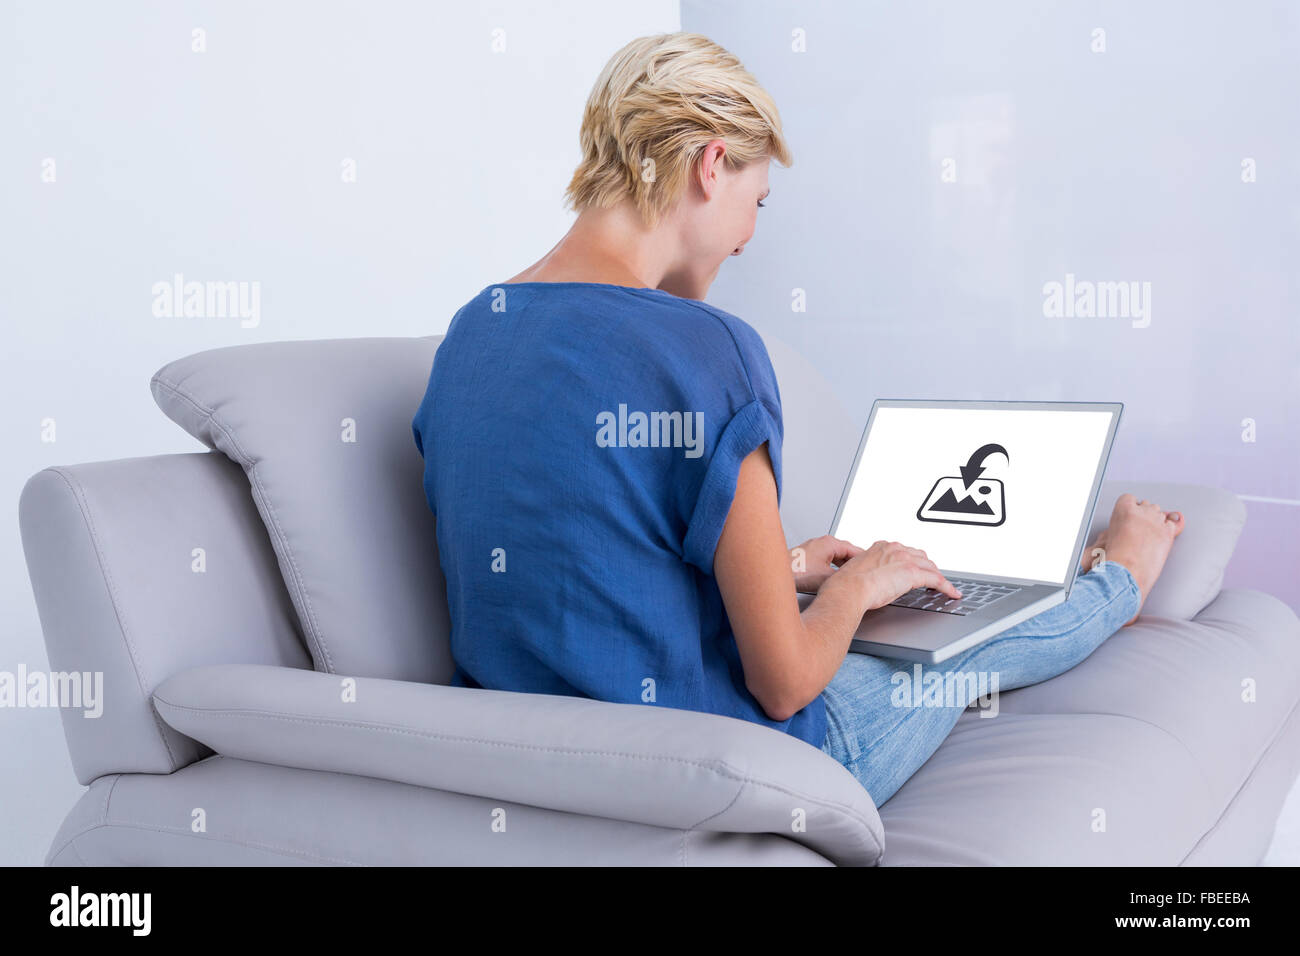 Composite image of blonde woman using her laptop on the couch Stock Photo